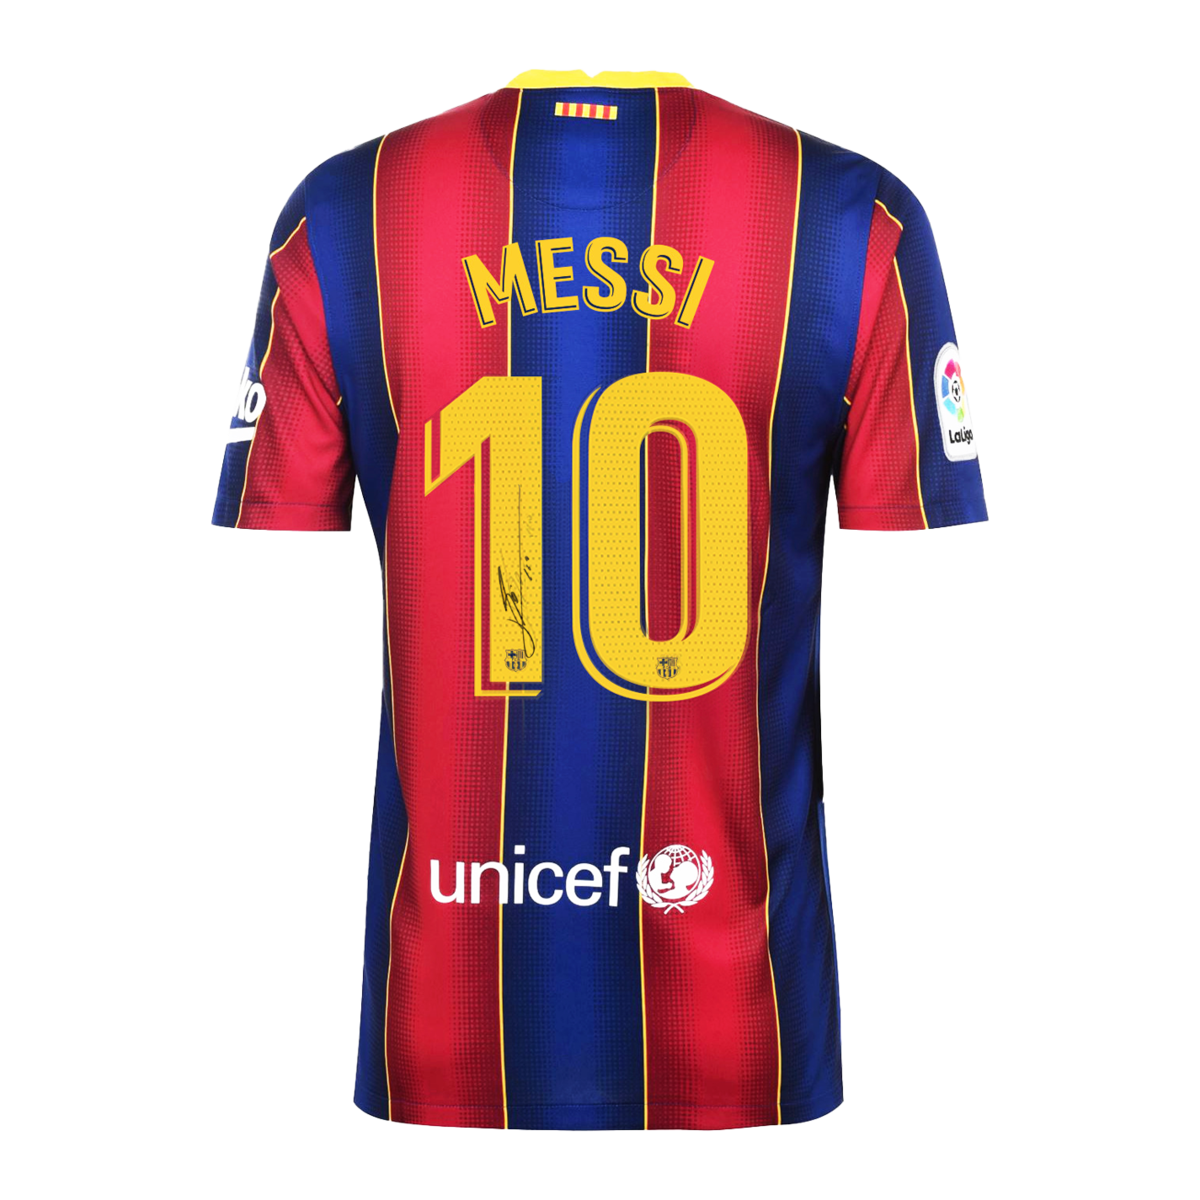 MATCH ISSUE Lionel Messi Official FC Barcelona Back Signed 2020-21 Home Shirt - The Bootroom Collection